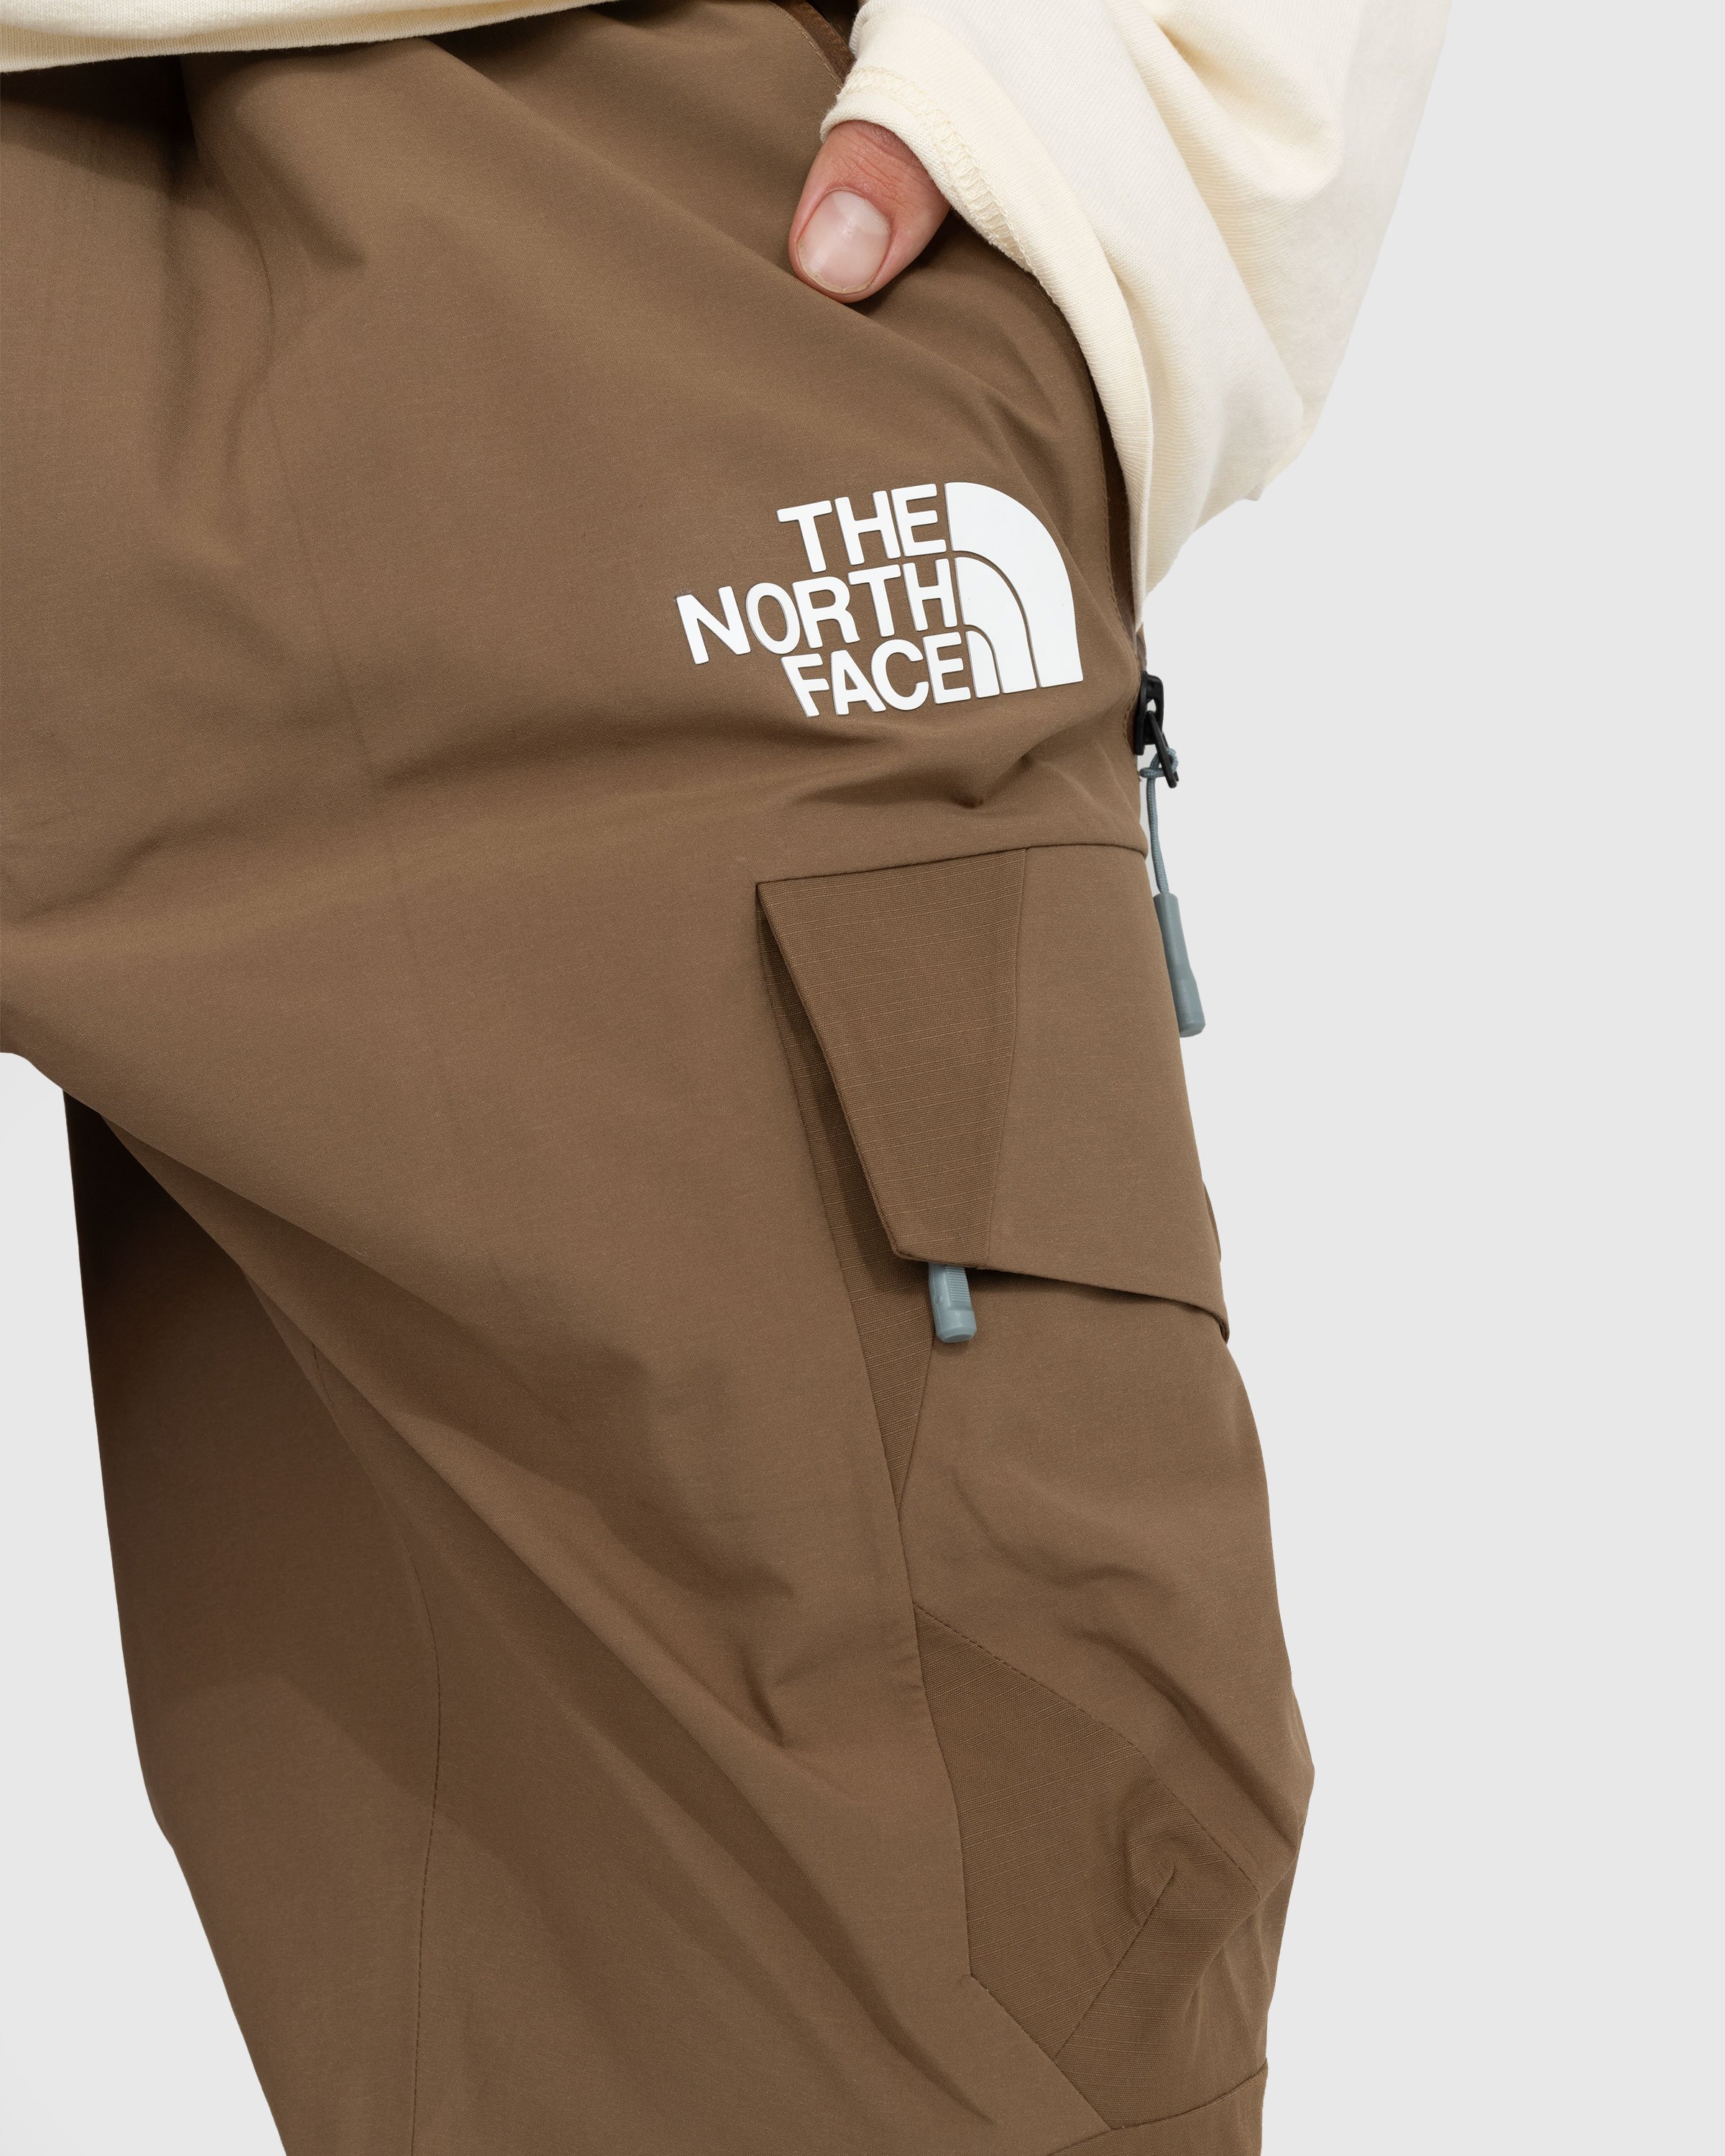 The North Face x UNDERCOVER - Geodesic Shell Pants Sepia Brown - Clothing - Brown - Image 4